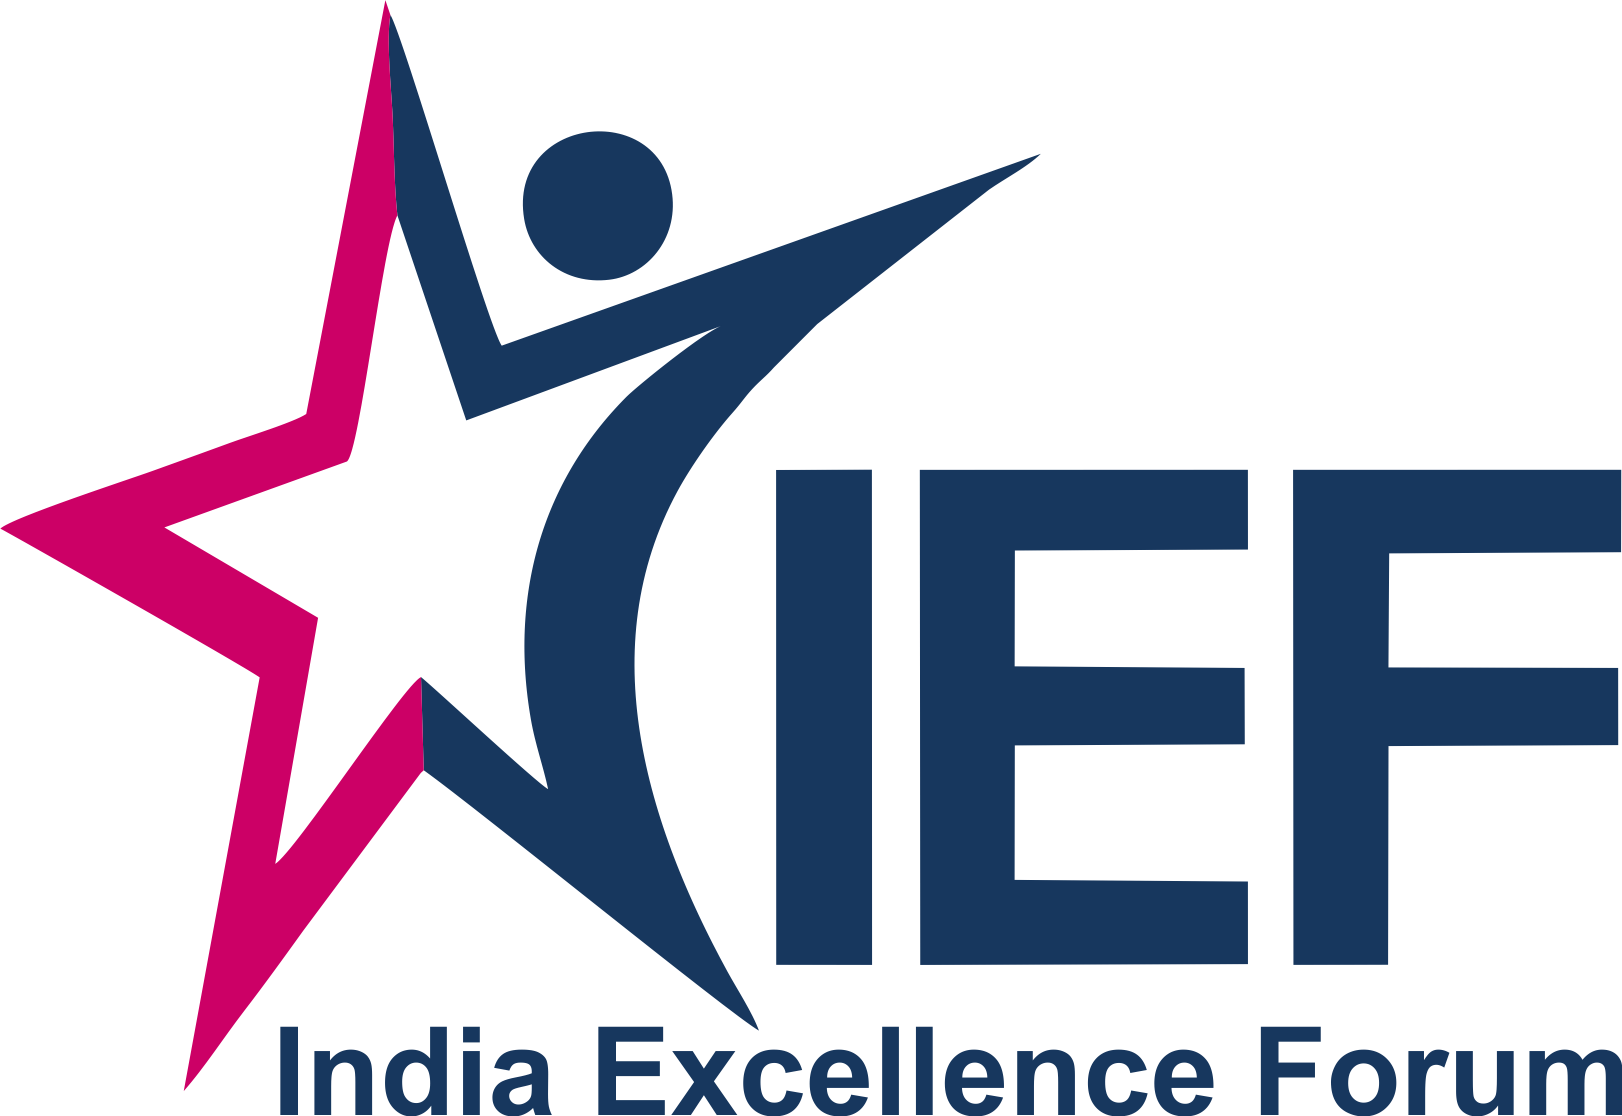 India Excellence Forum